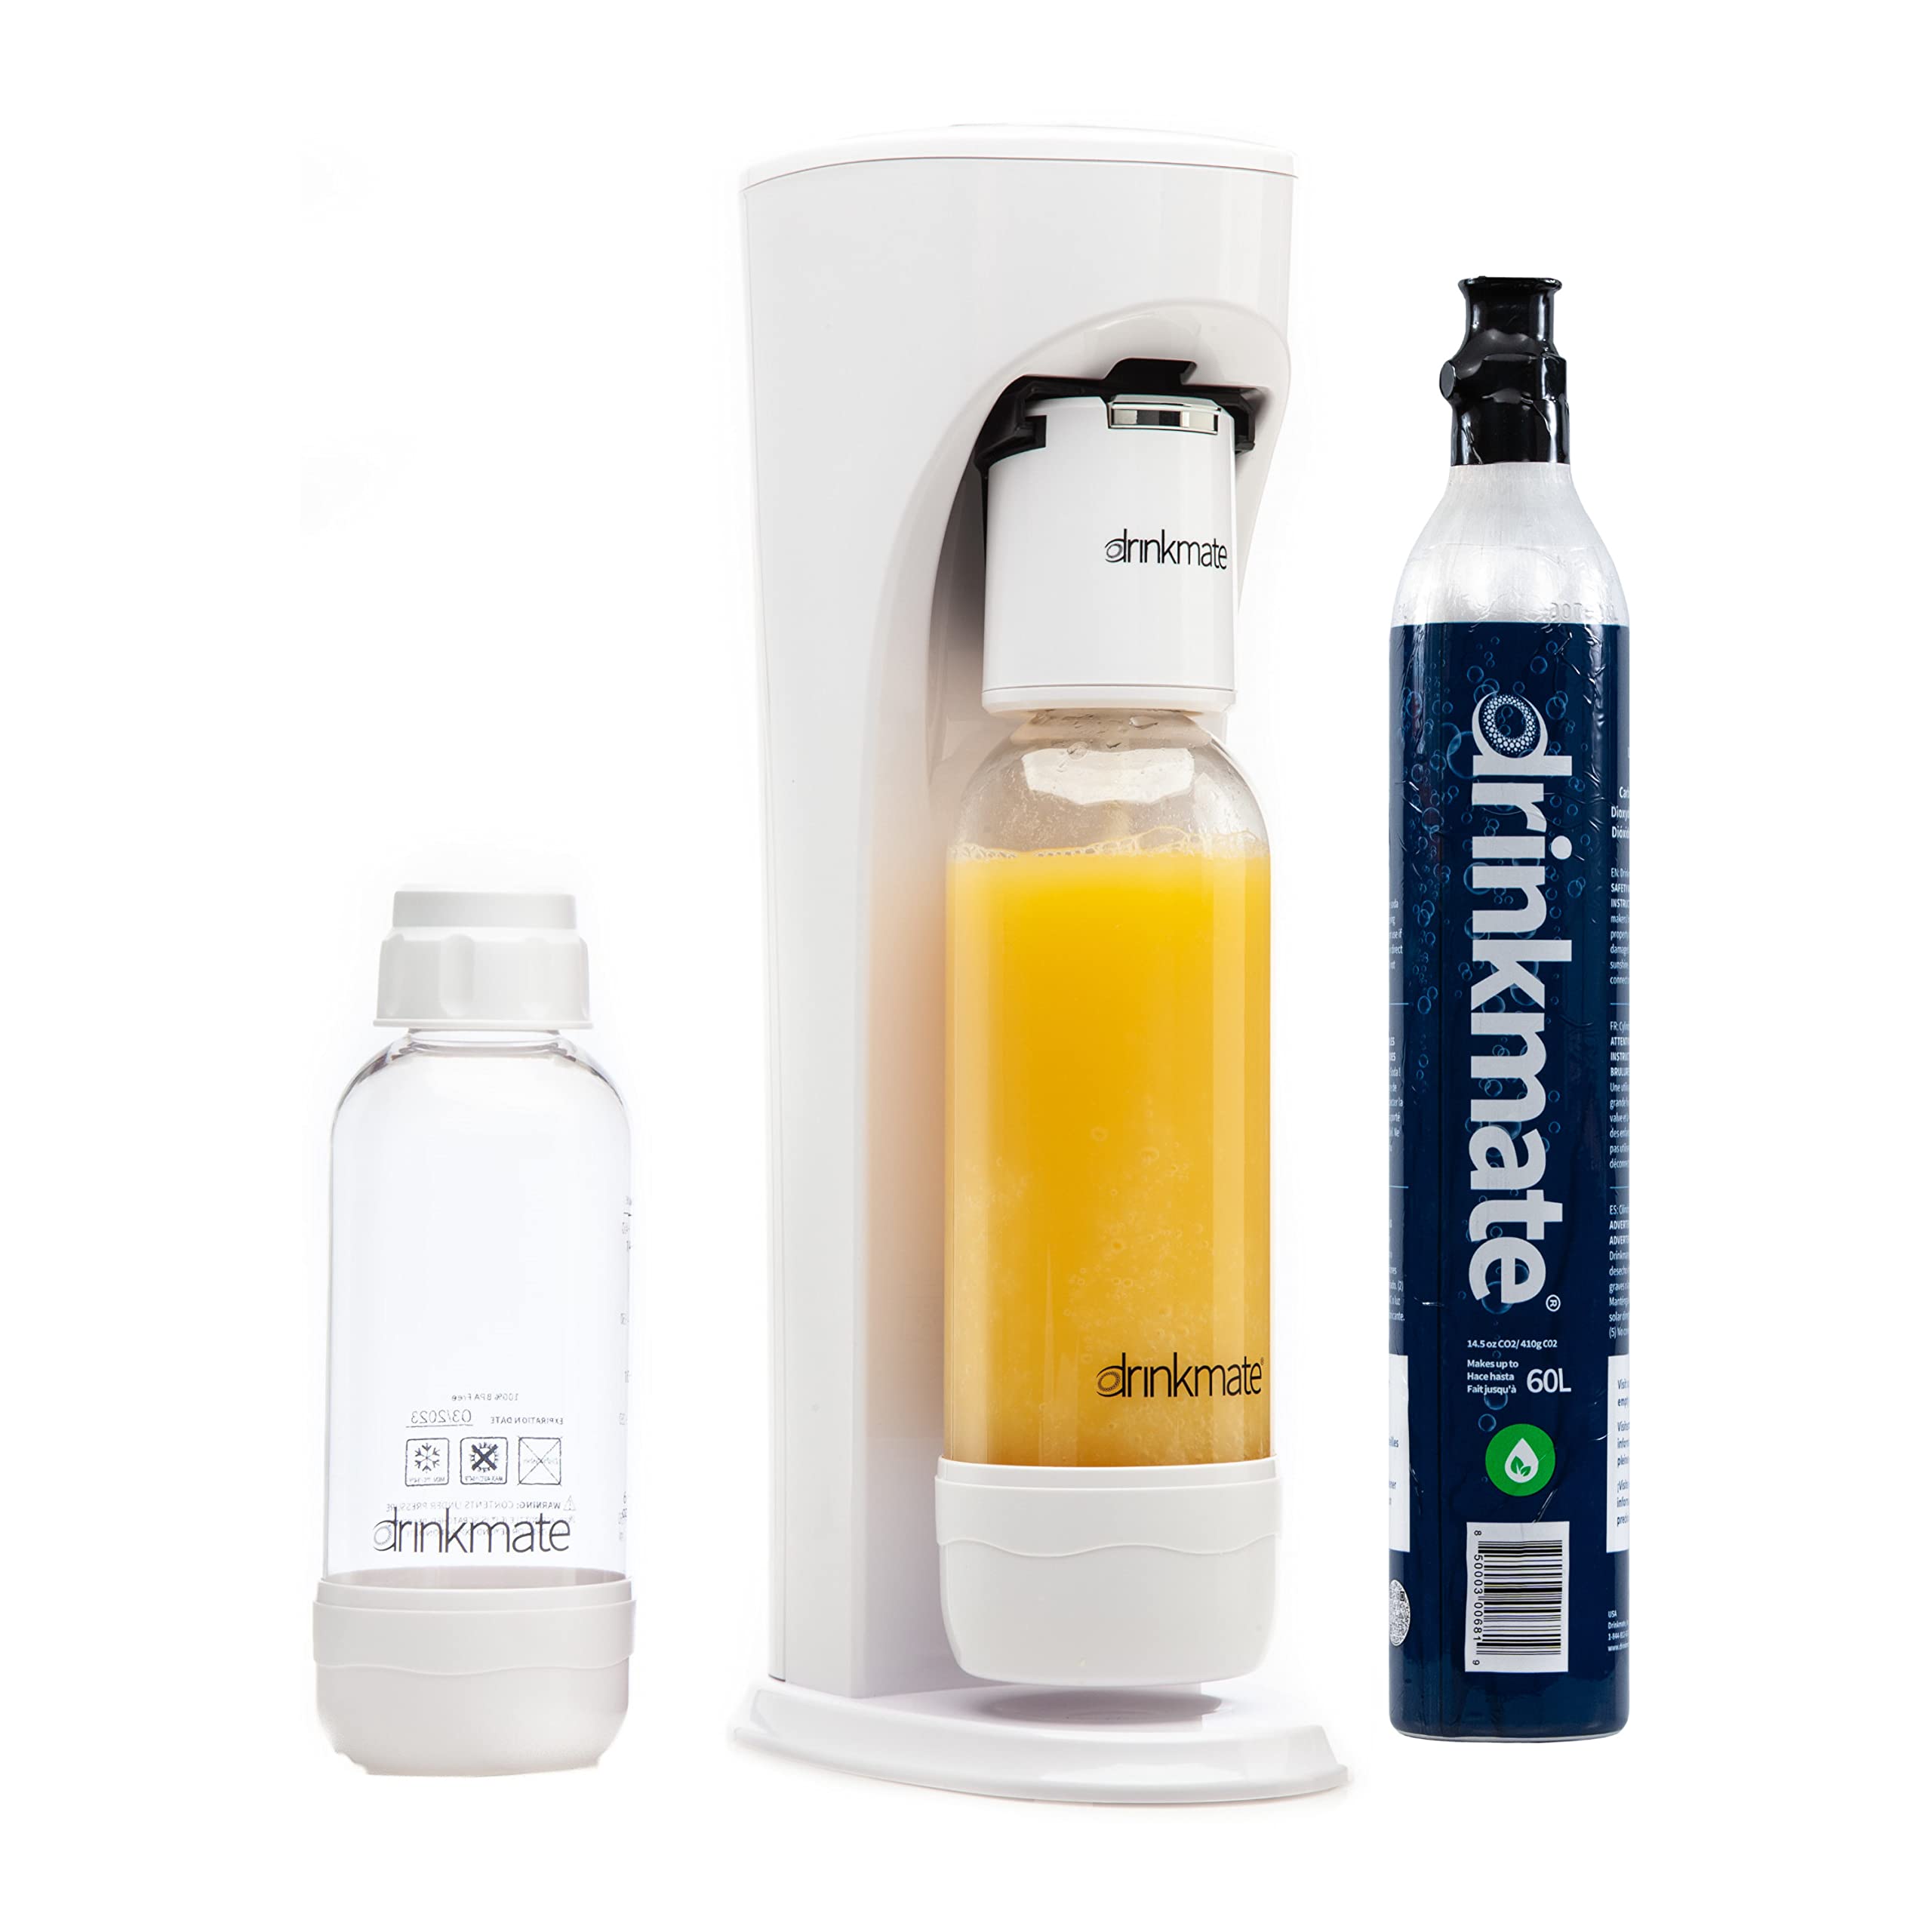 Drinkmate Omnifizz Sparkling Water And Soda Maker, Carbonates Any Drink, Special Bundle - Includes 60L Co2 Cylinder, Two Carbona